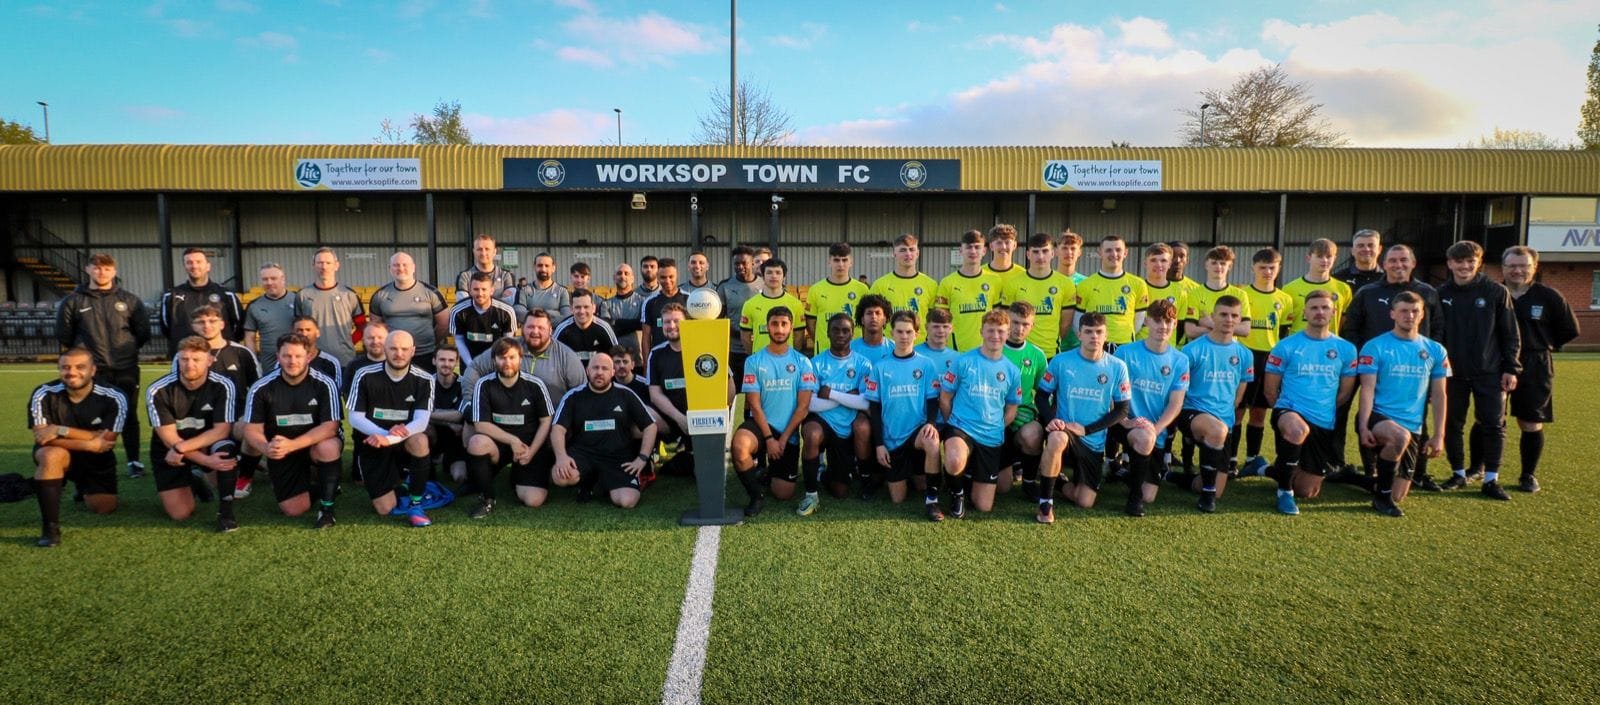 Imperial Personnel participate in charity football match at Worksop Town FC